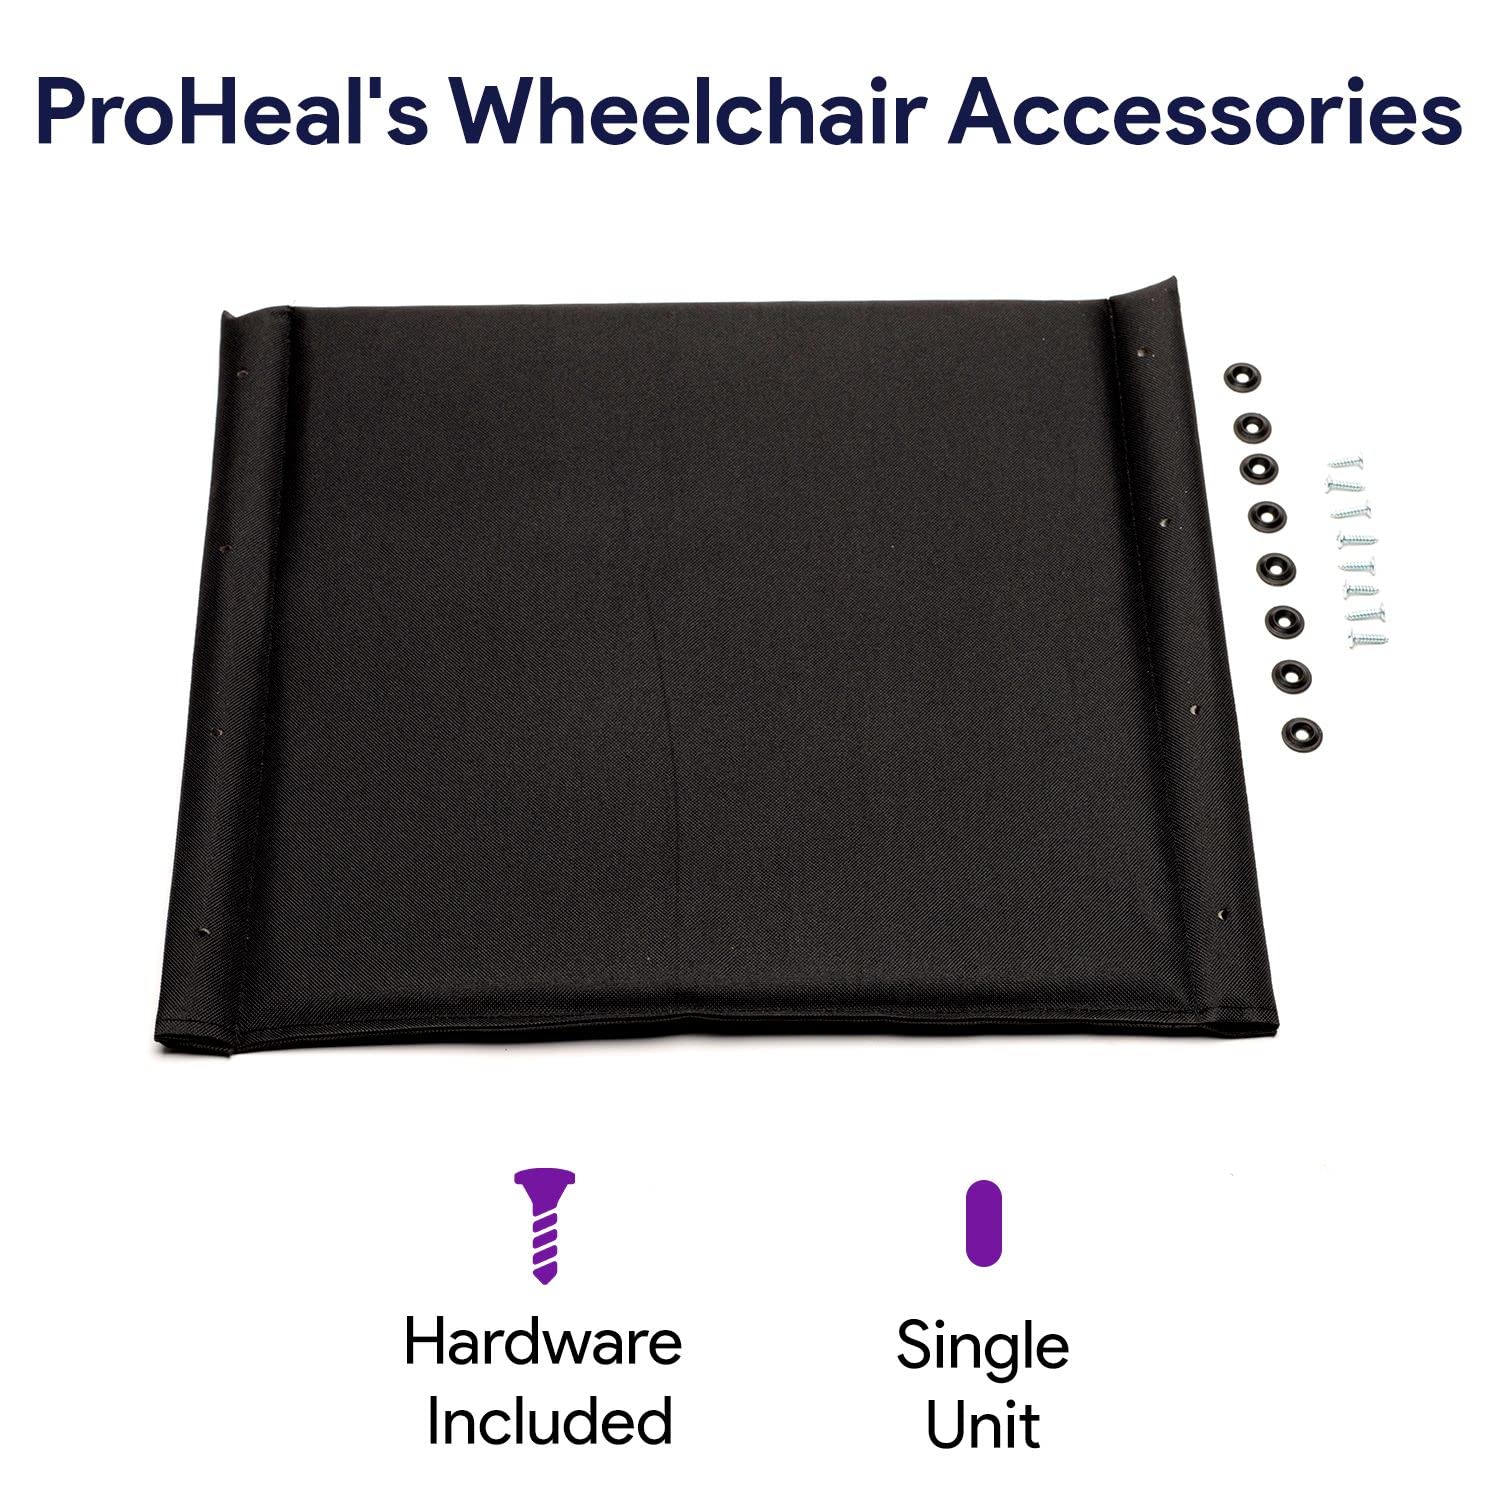 Vinyl Wheelchair Seat Replacement - Upholstery Wheelchair Seats Replacements for 16" Chair - Comfortable and Supportive Padded Seat for Wheelchair - K2  - Very Good